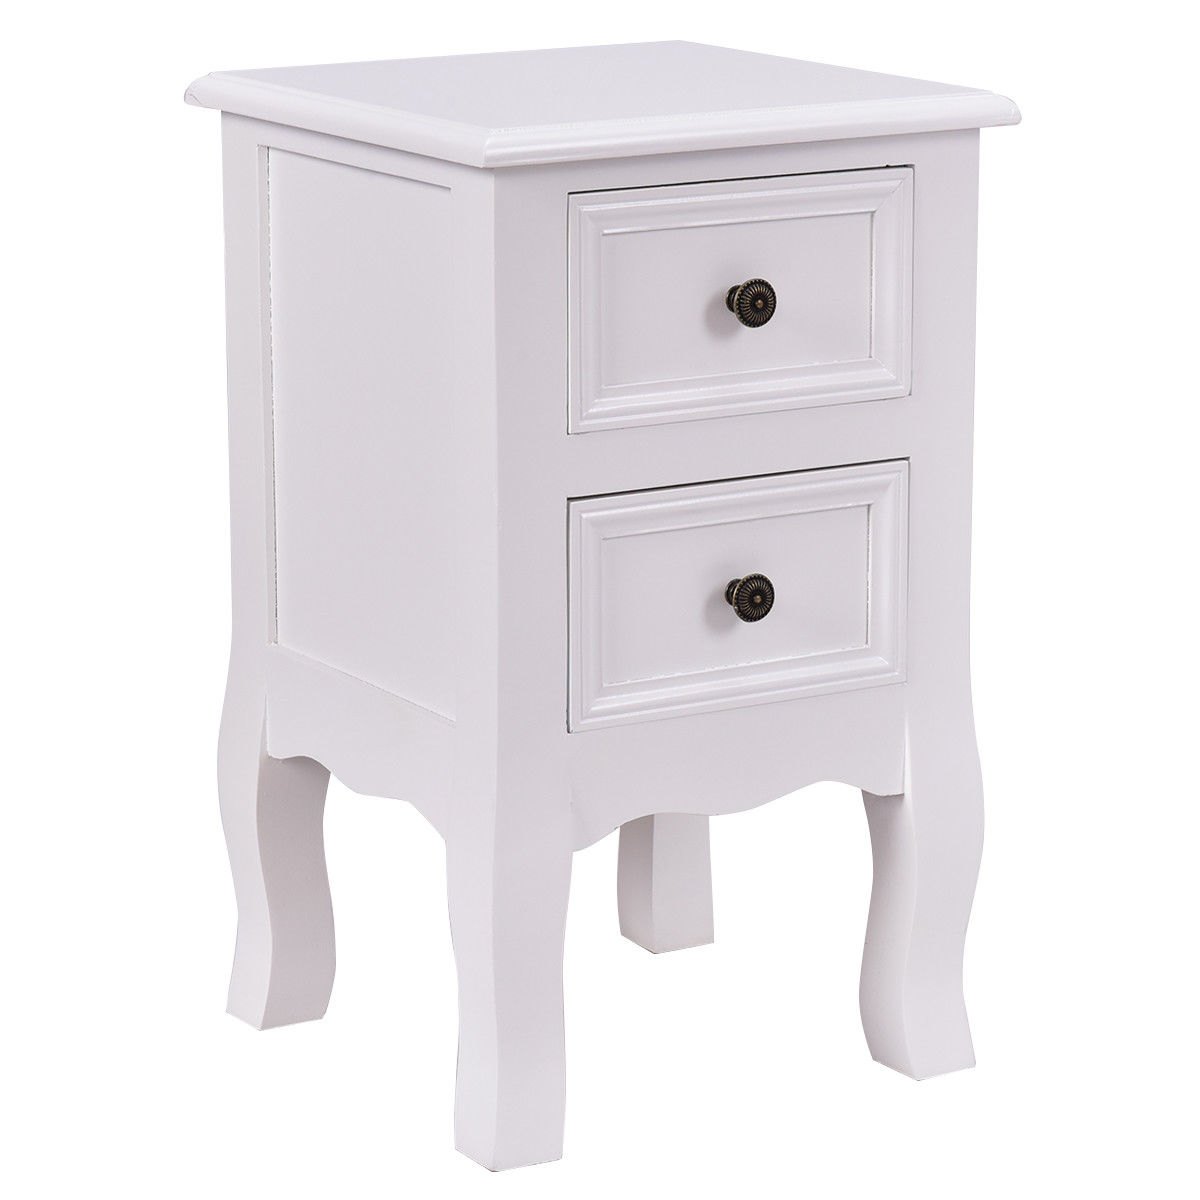 way white night stand storage drawers wood end accent table corner desk with hutch small garden pewter lamps ashley signature sofa unique cabinet hardware lawn and patio furniture